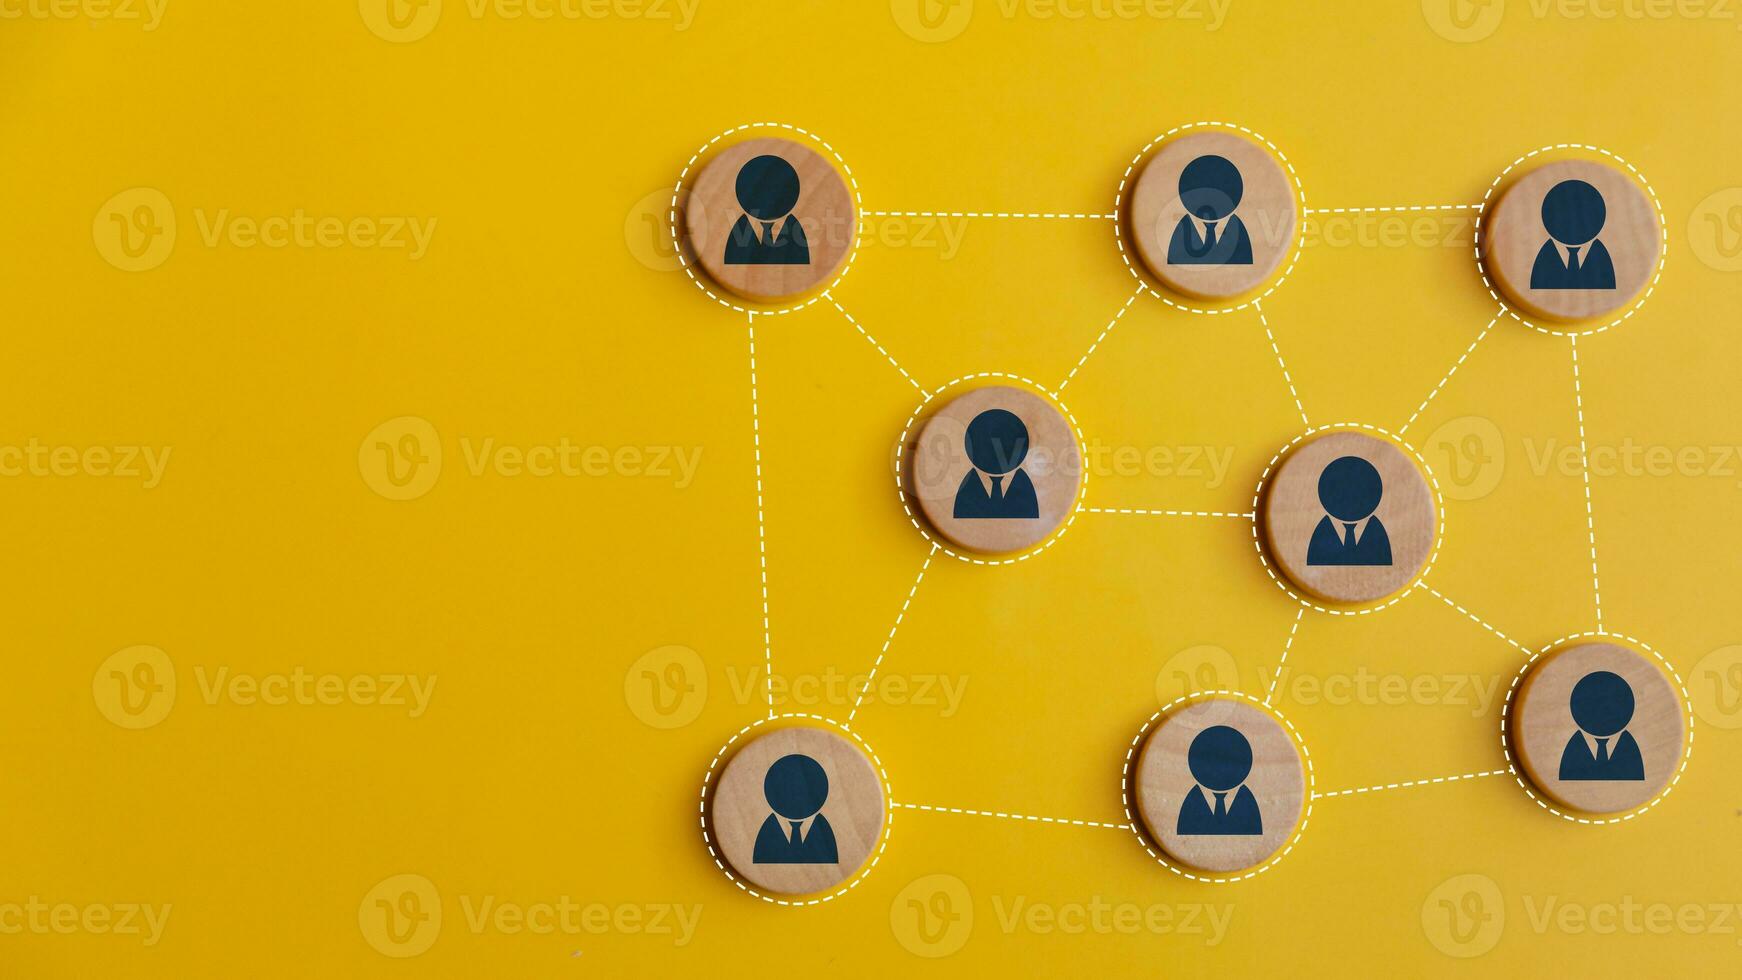 Wooden blocks connected together on a yellow background. Teamwork, network, and community concept. photo